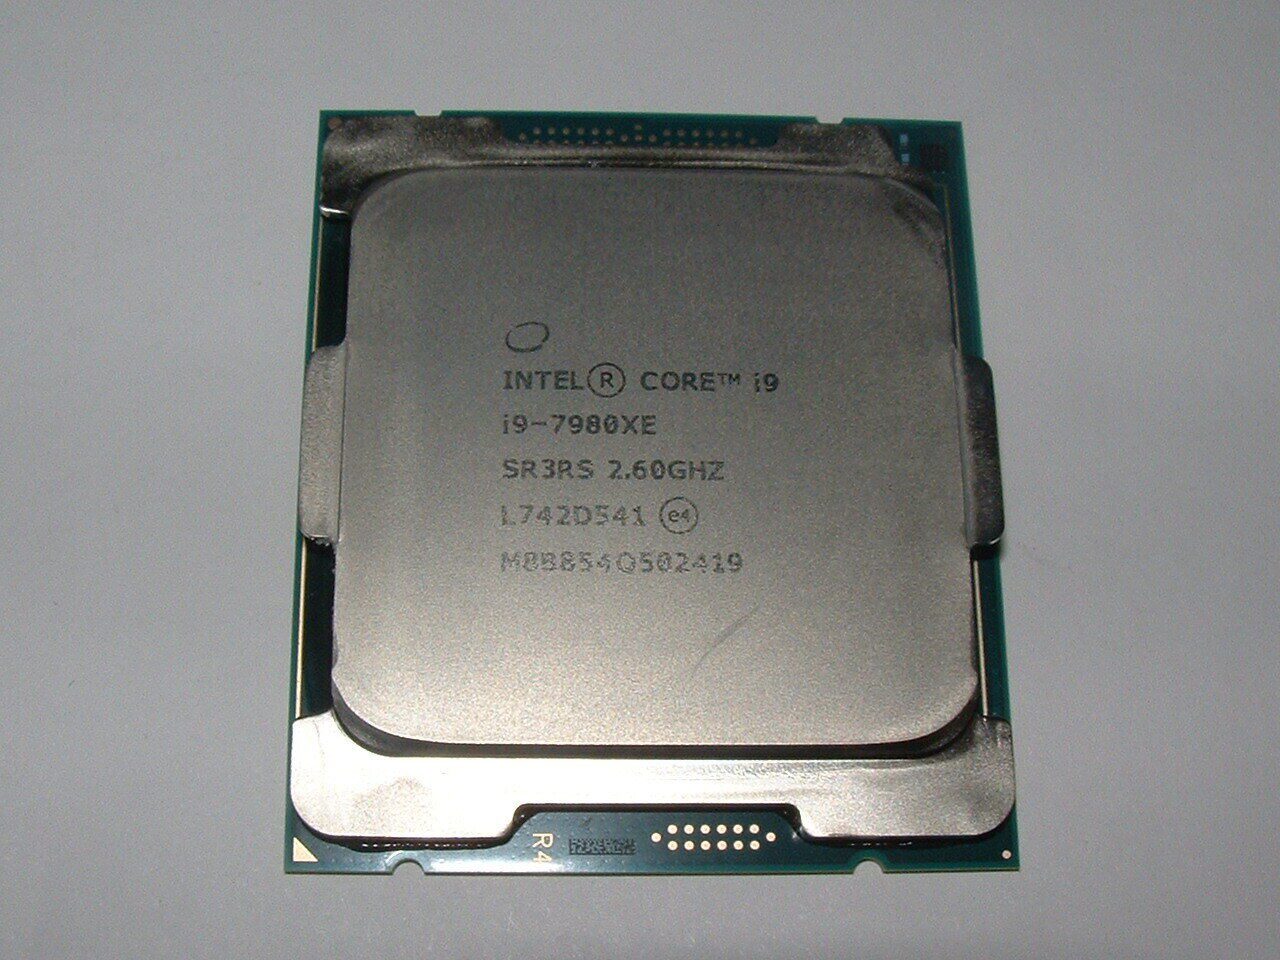 Intel Core i9-7980XE CPU Extreme Edition Processor 24.75M Cache up to 4.20  GHz